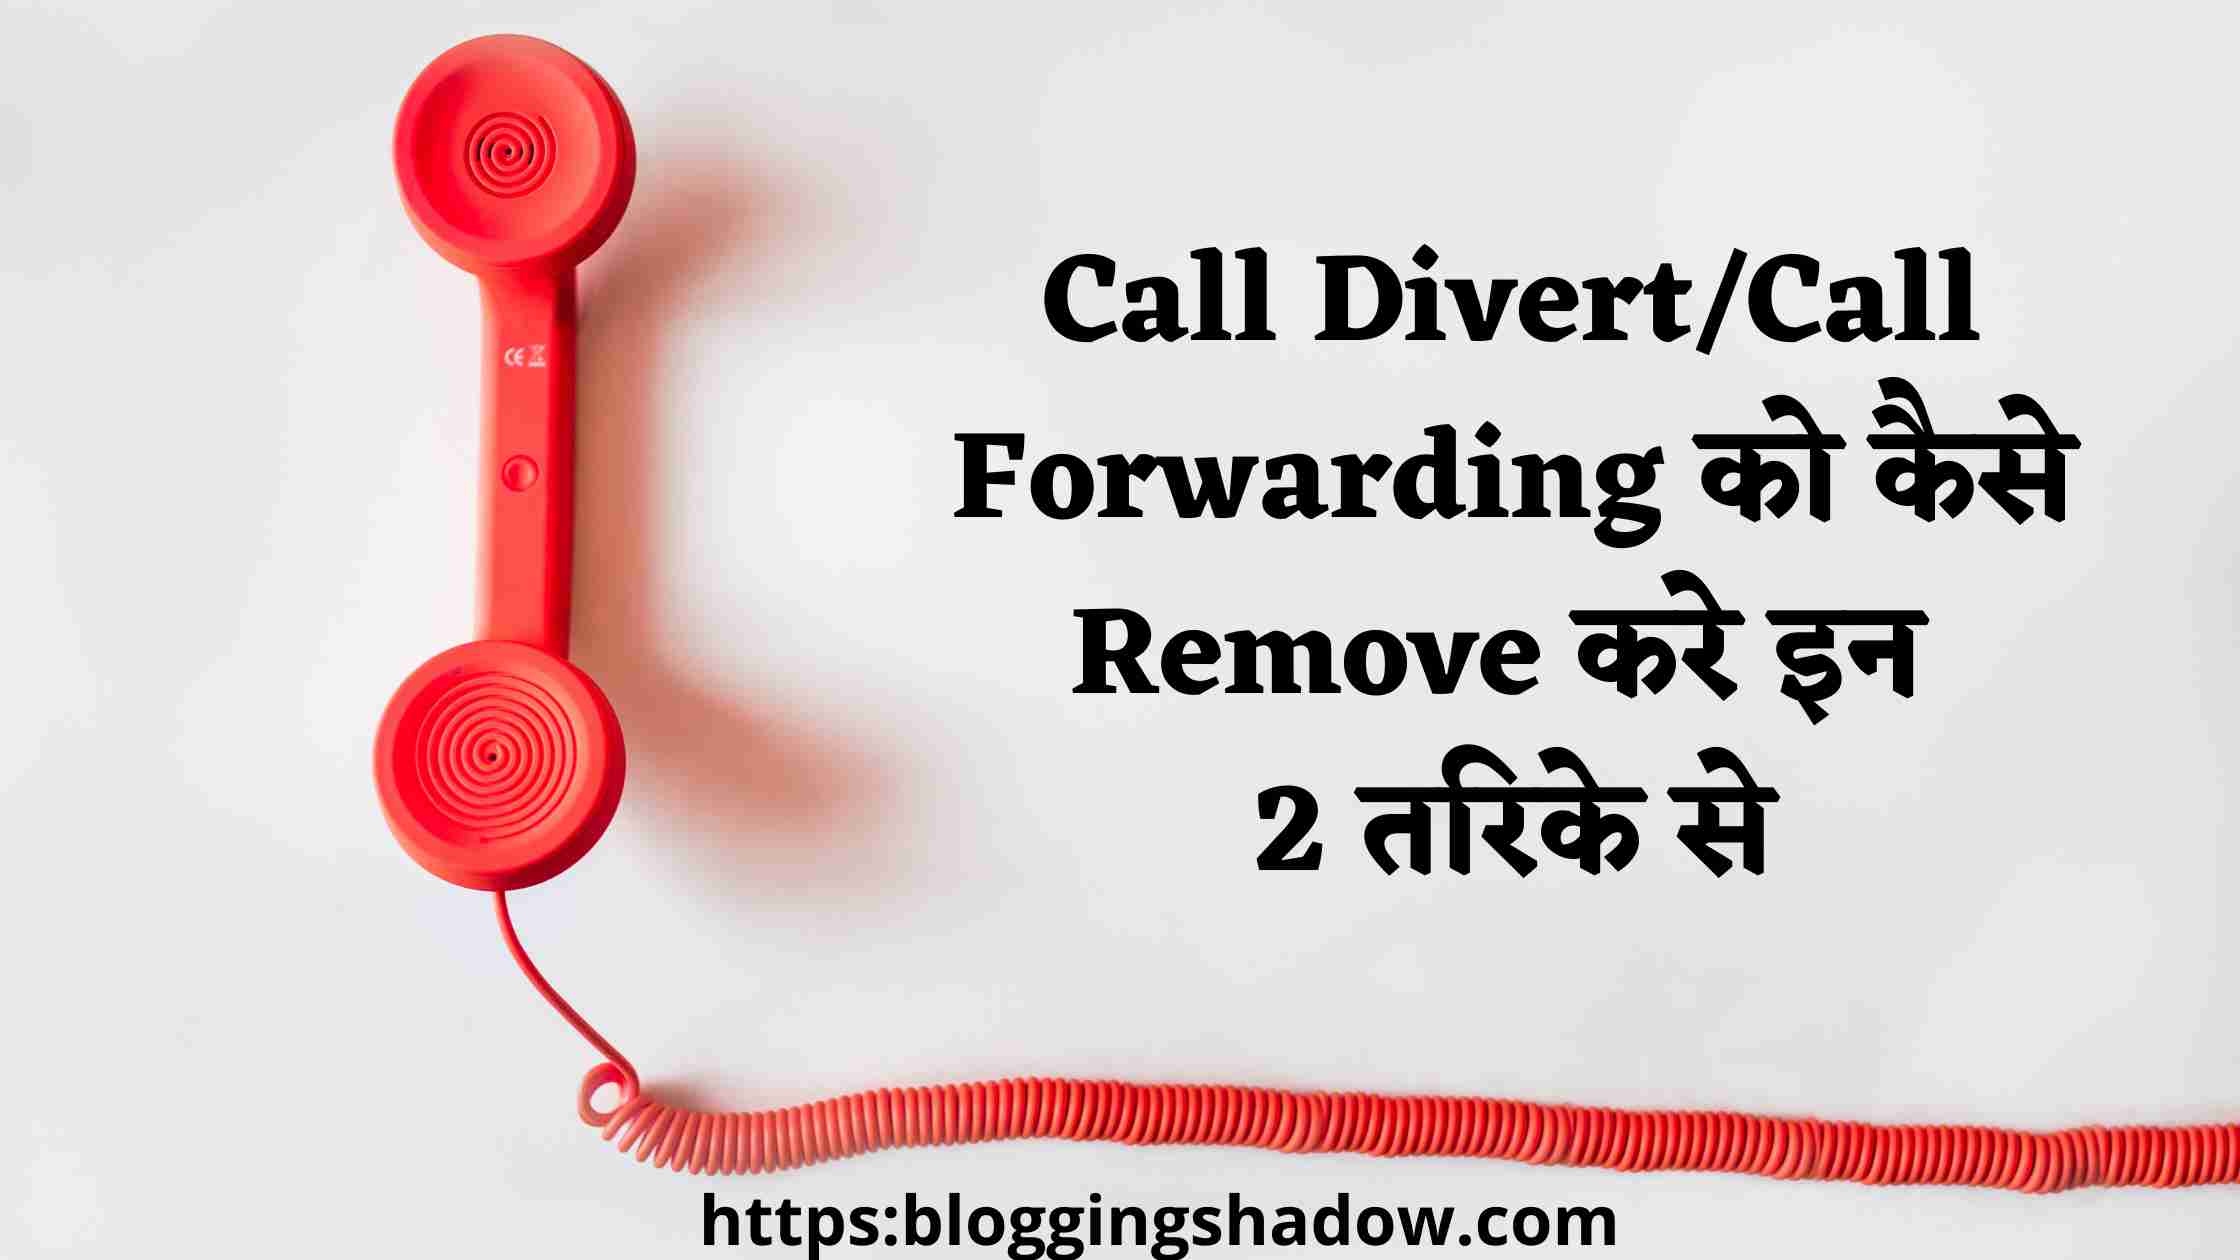 how to remove call divert in android